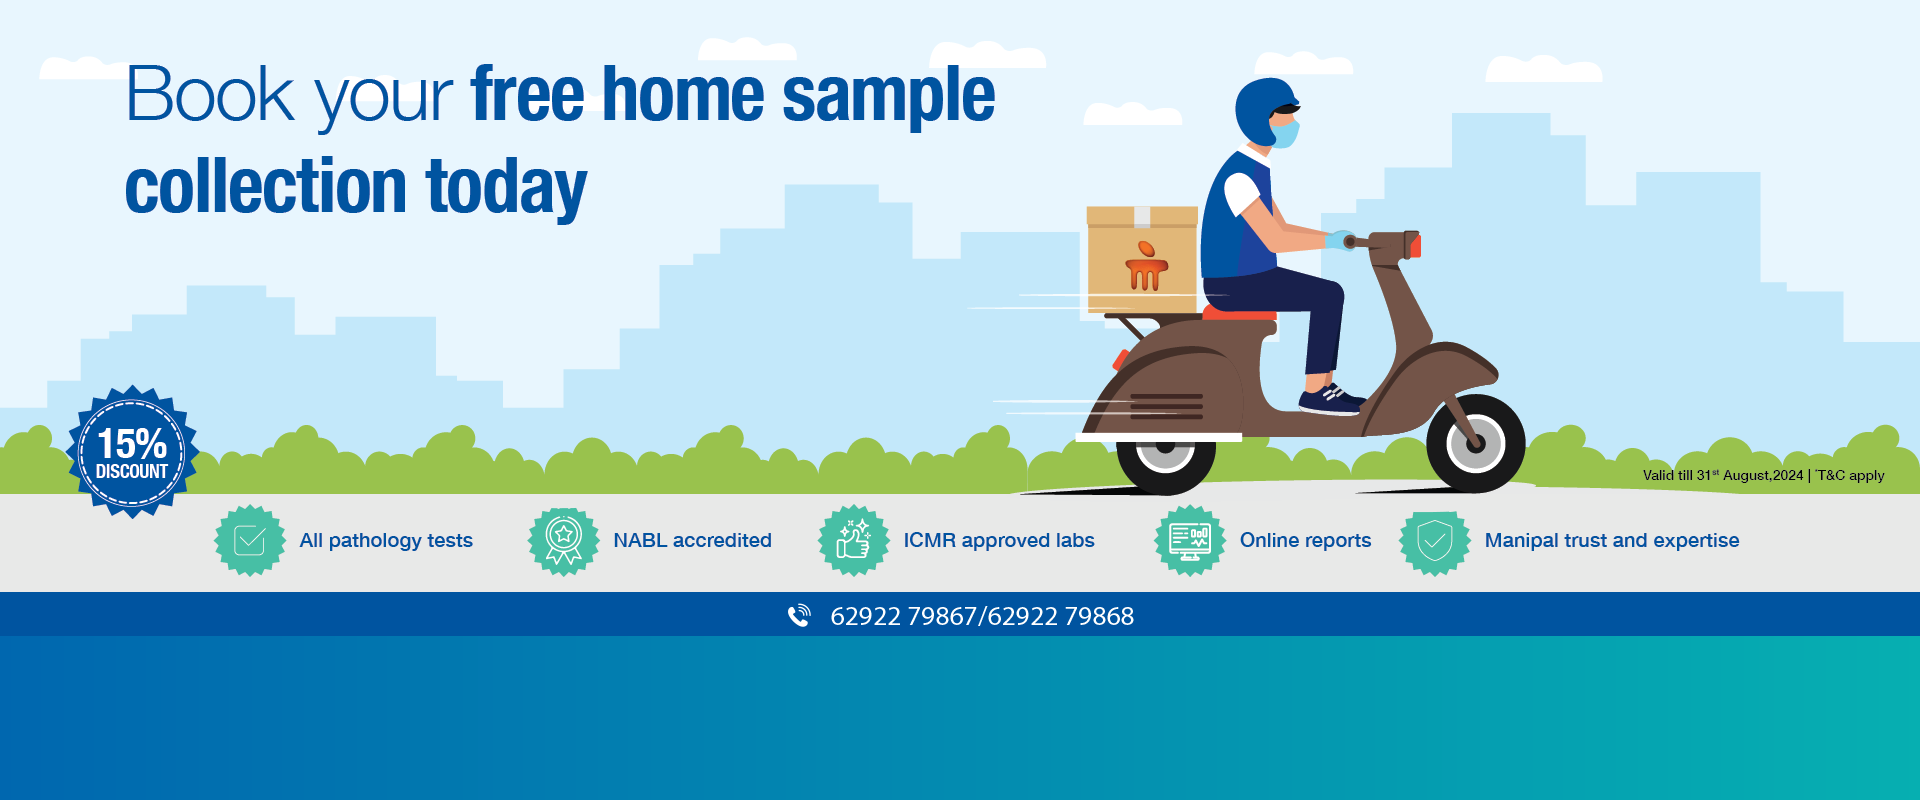 Free Home Sample Collection - Manipal Hospitals